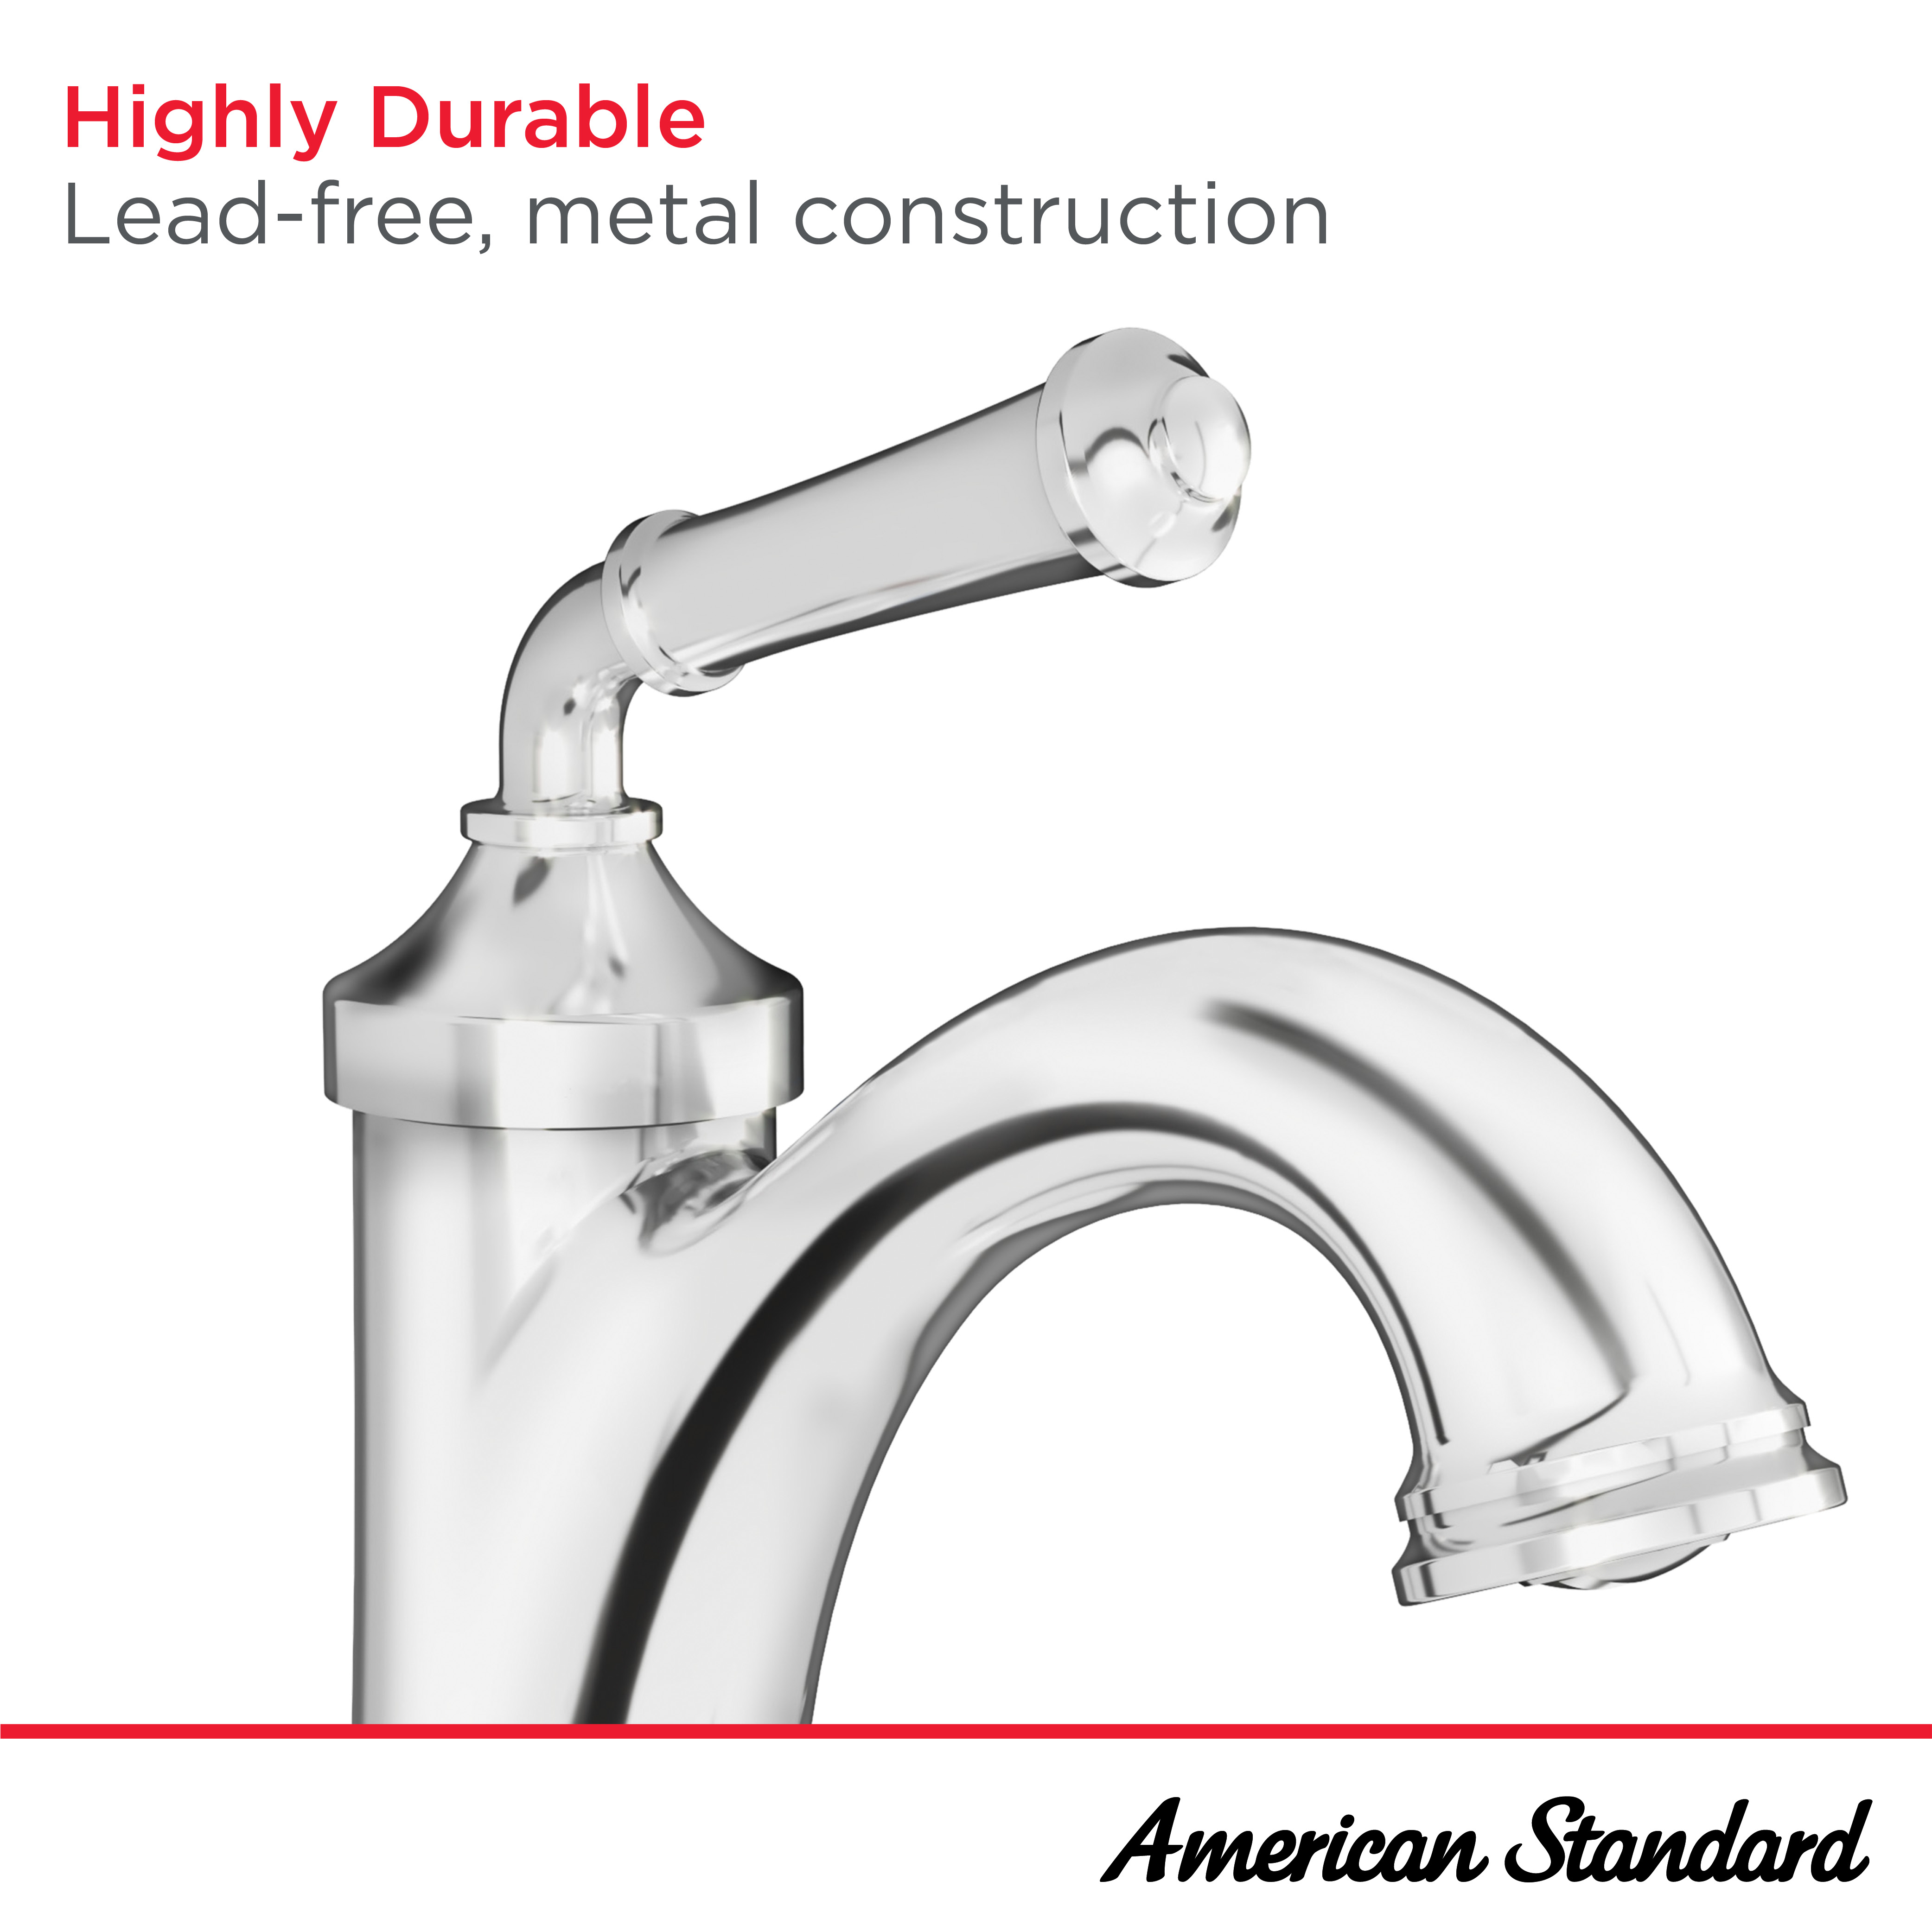 Delancey™ Single Hole Single-Handle Bathroom Faucet 1.2 gpm/4.5 L/min With Lever Handle